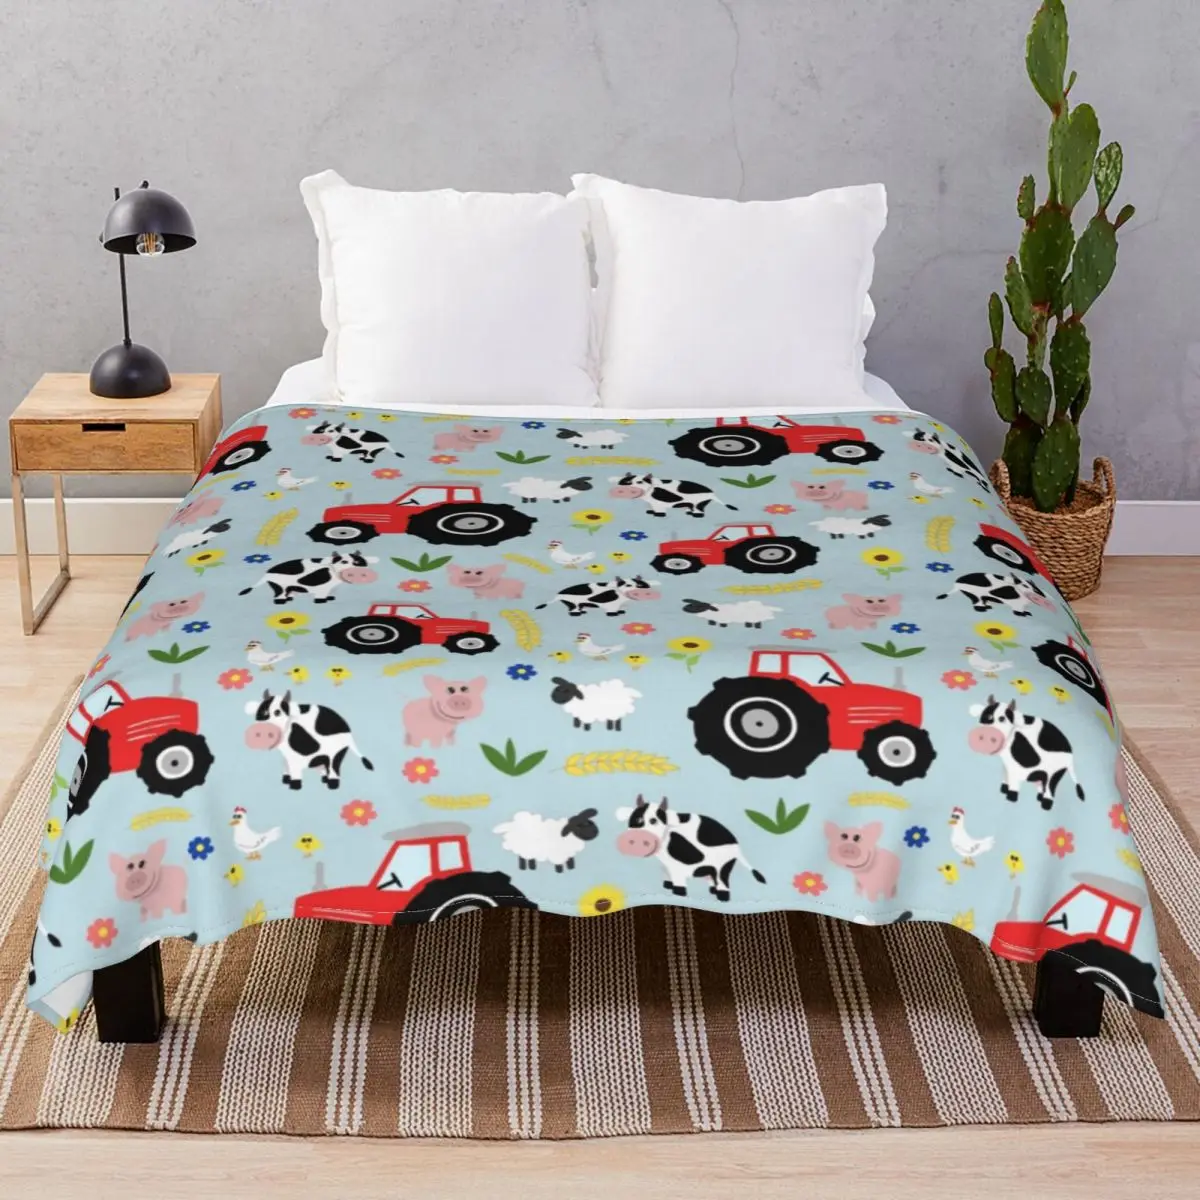 Cute Kids Red Tractor Blankets Fleece Summer Ultra-Soft Unisex Throw Blanket for Bed Home Couch Camp Office